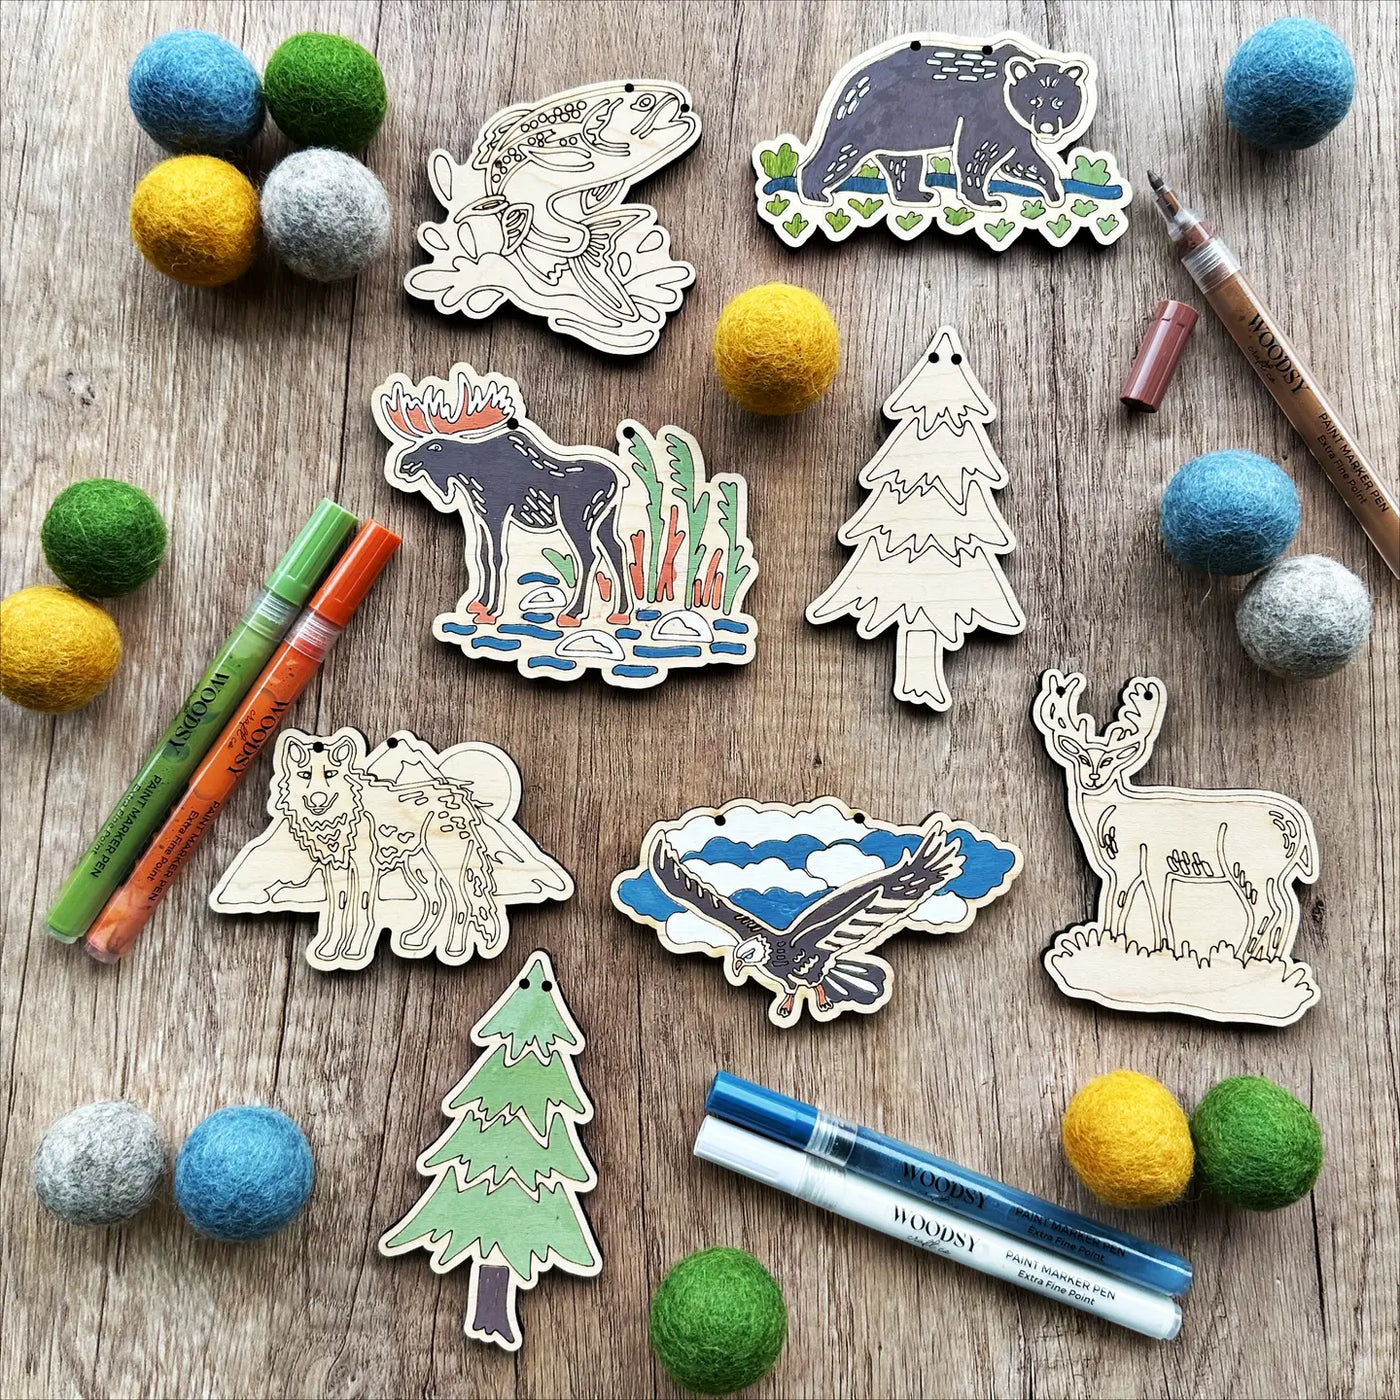 DIY Craft Kit - Wilderness by Woodsy Craft Co.